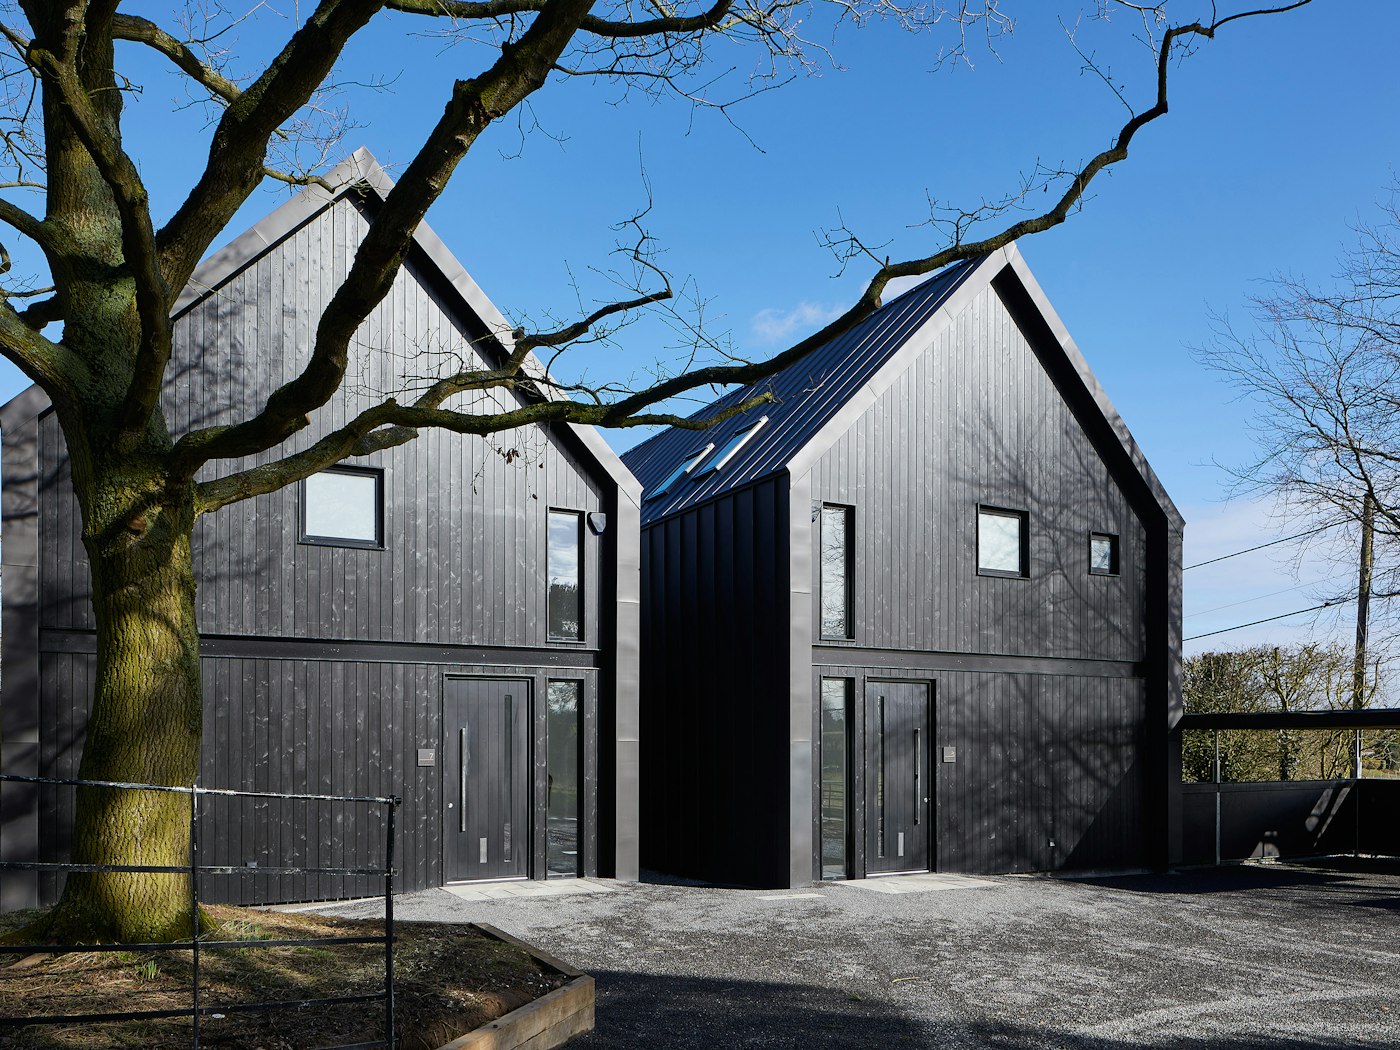 These contemporary houses were designed to mimic farm buildings, complete with black cladding & black exterior doors